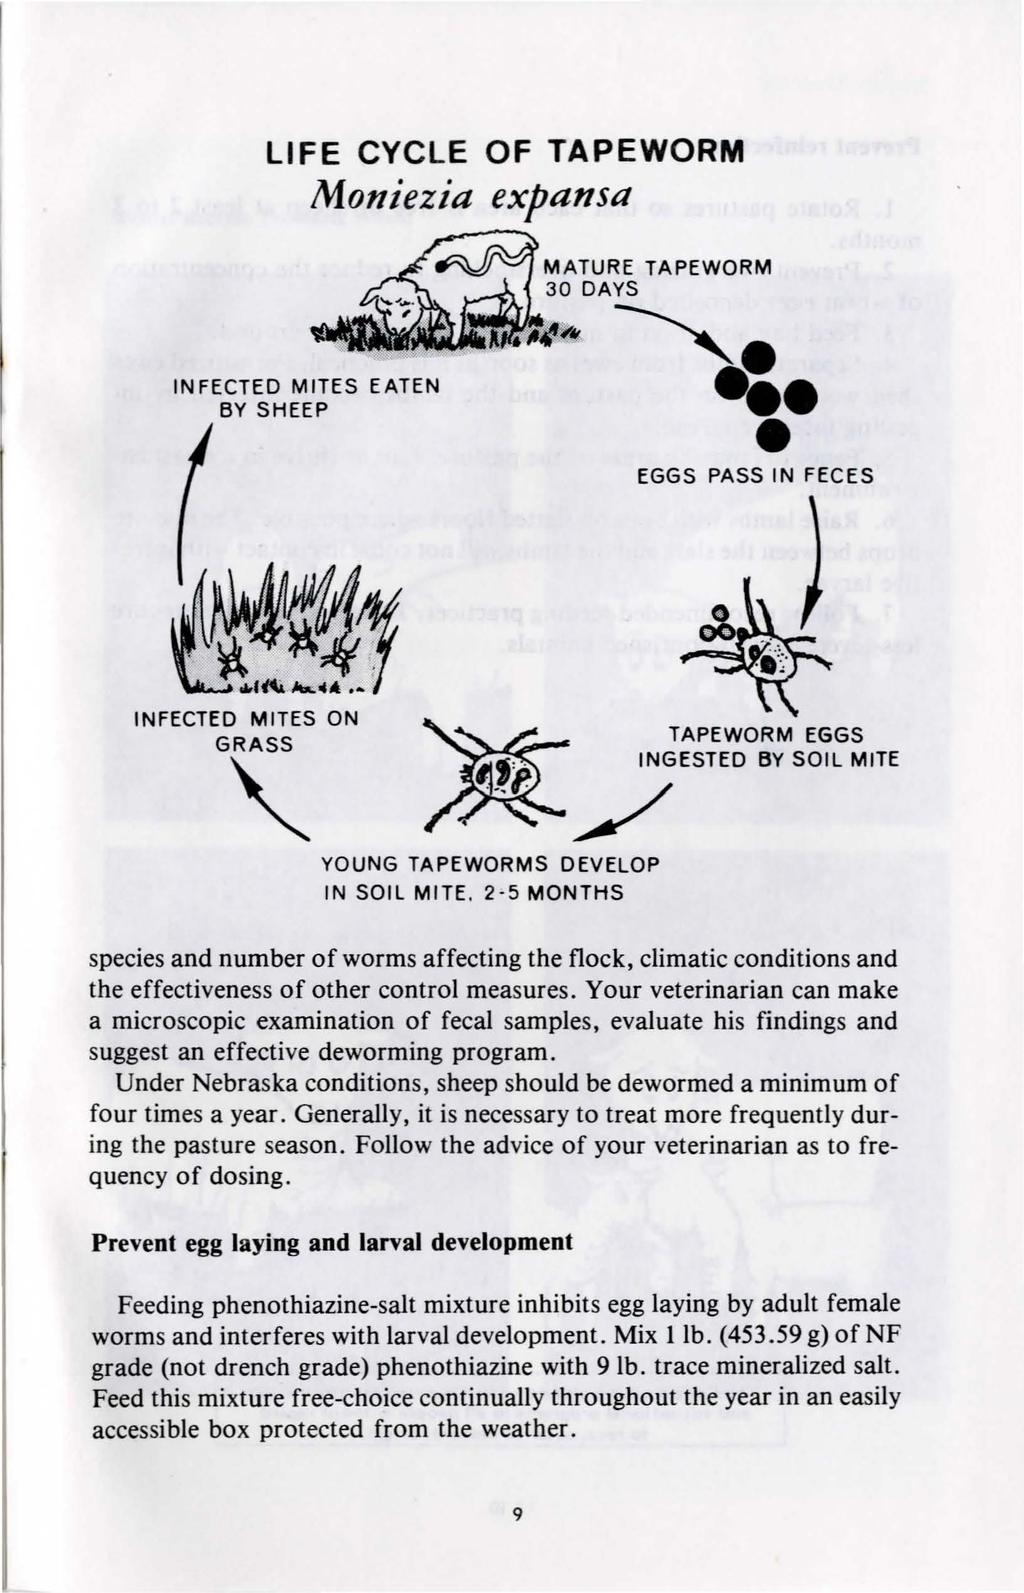 LIFE CYCLE OF TAPEWORM Moniezia expansa INFECTED MITES EATEN BY SHEEP MATURE TAPEWORM 30 DAYS ' EGGS PASS IN FECES INFECTED MITES ON GRASS " / YOUNG TAPEWORMS DEVELOP IN SOIL MITE.